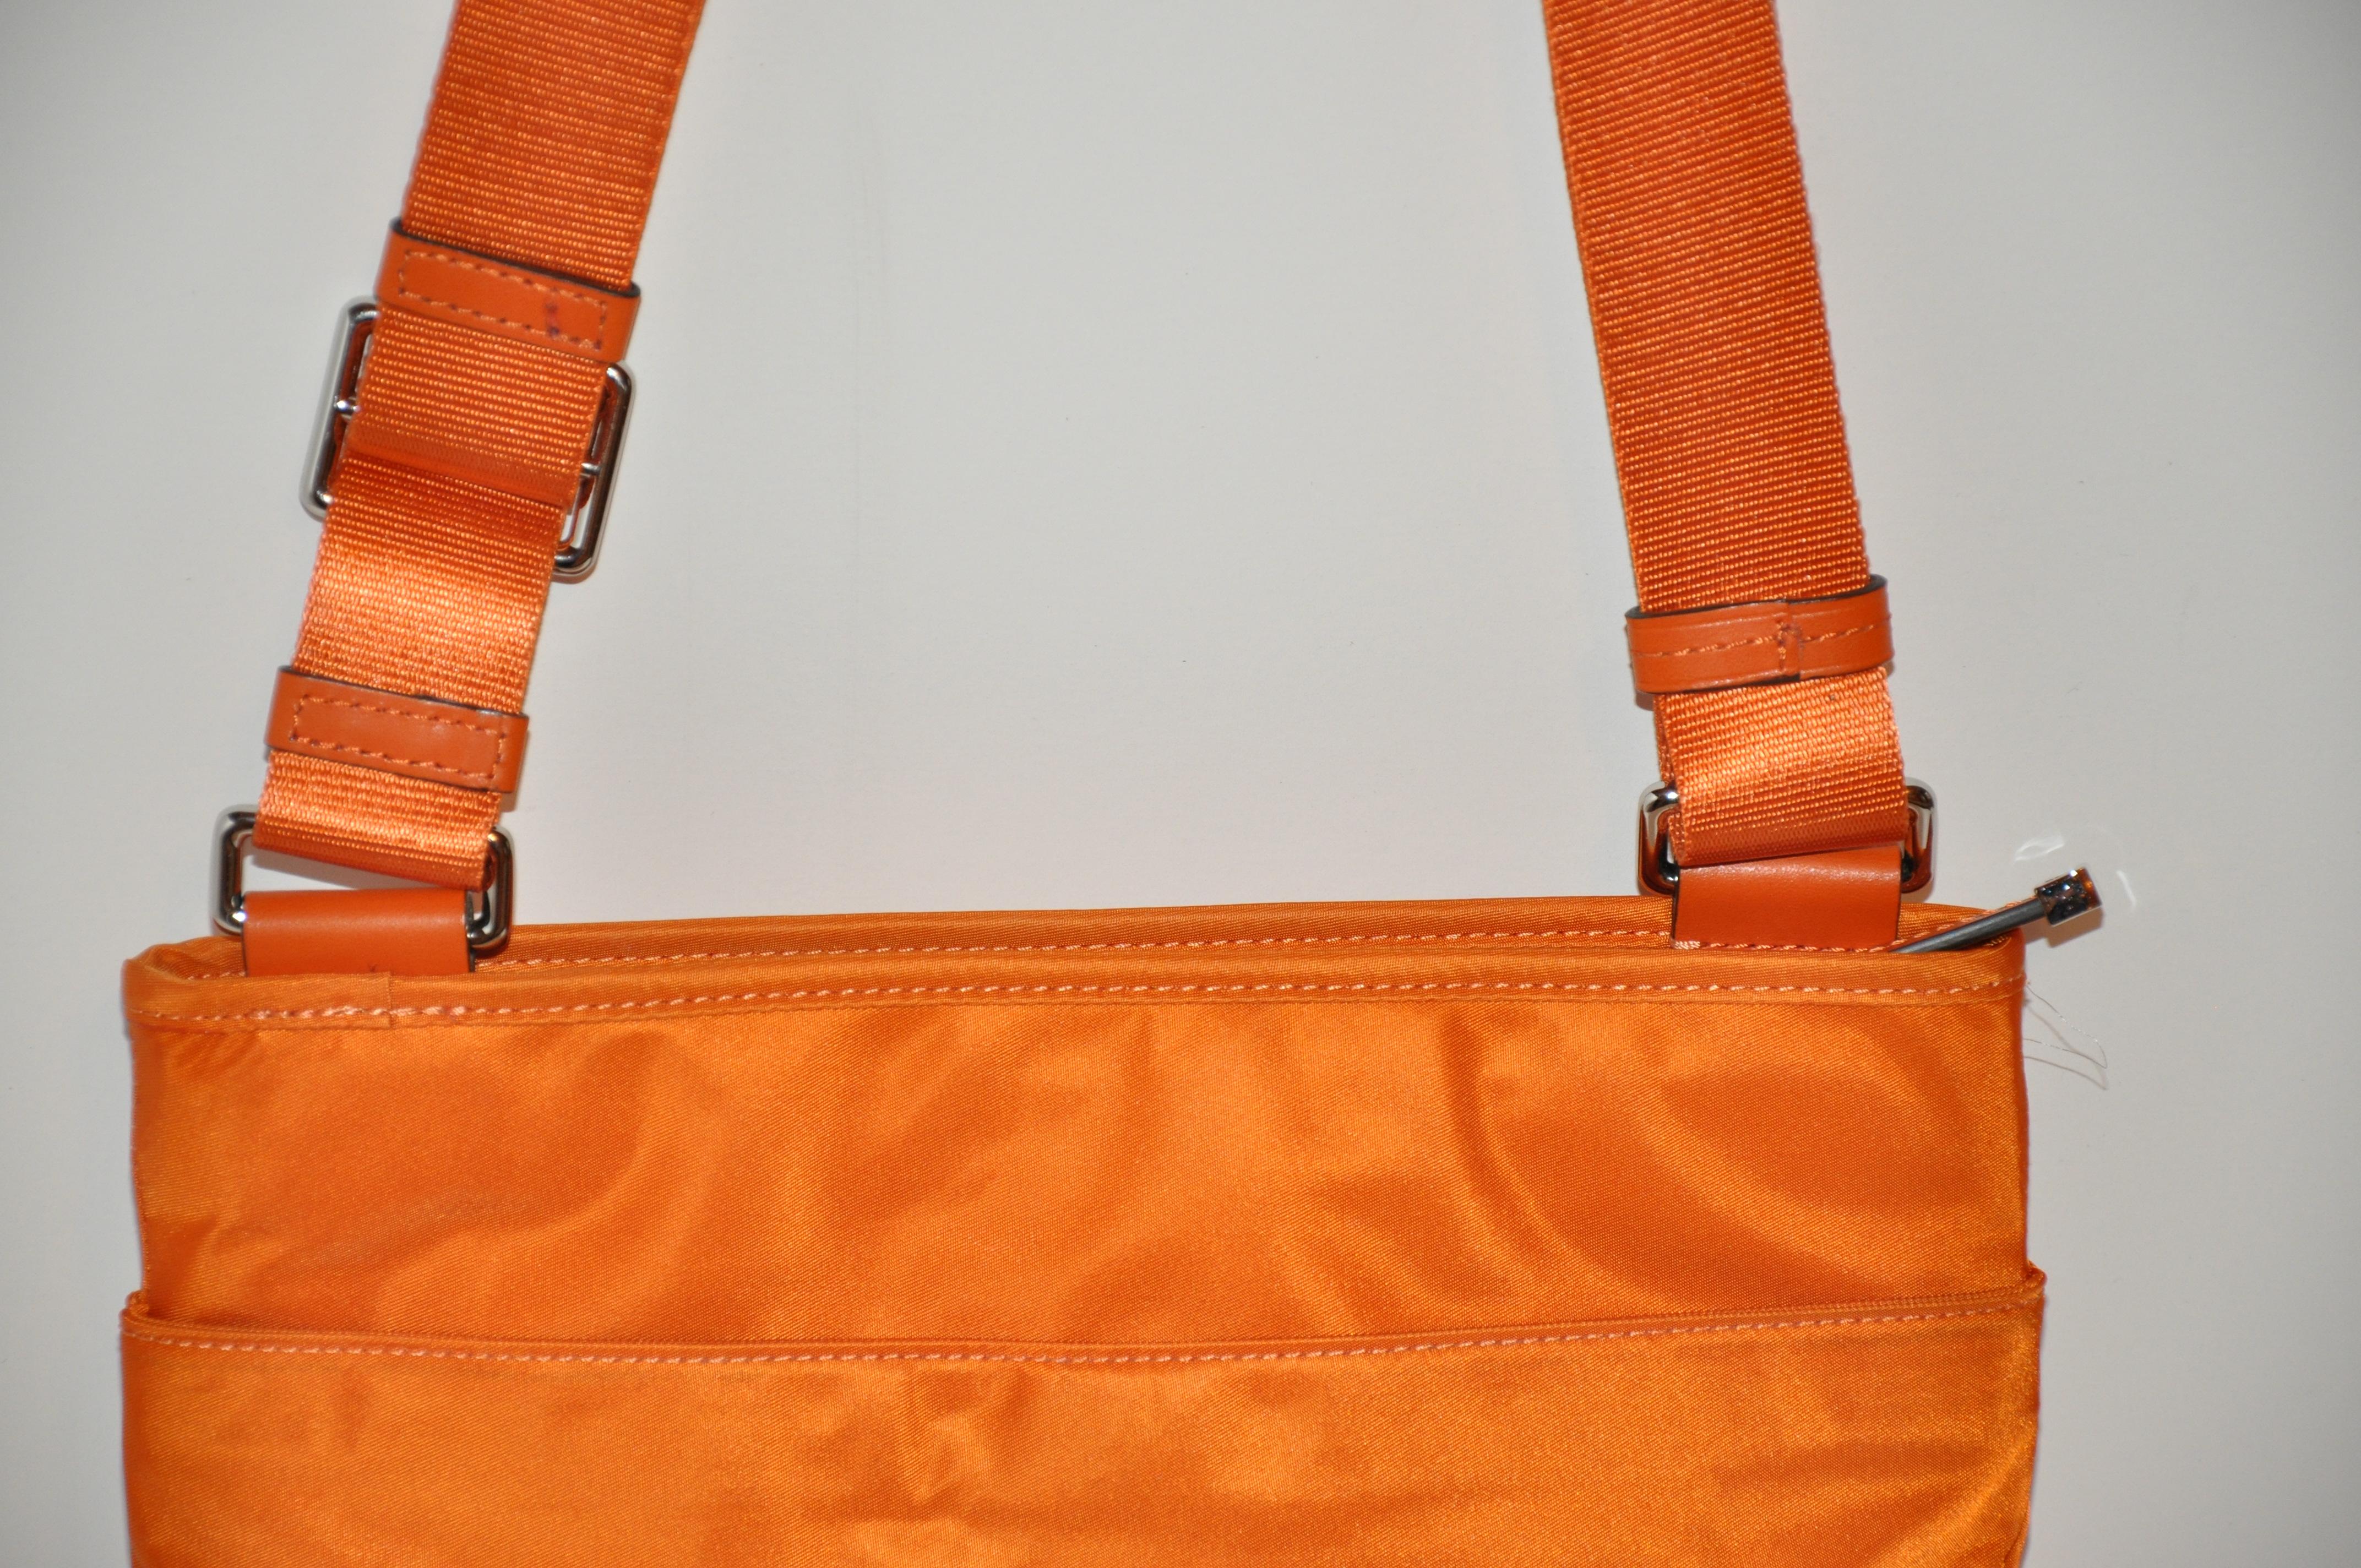        Tumi wonderful warm tangerine crossbody shoulder bag with adjustable shoulder straps, has a zippered compartment in front. The backside has an open compartment. The interior has 2 compartments. Item measures 11 inches in length, 10 inches in